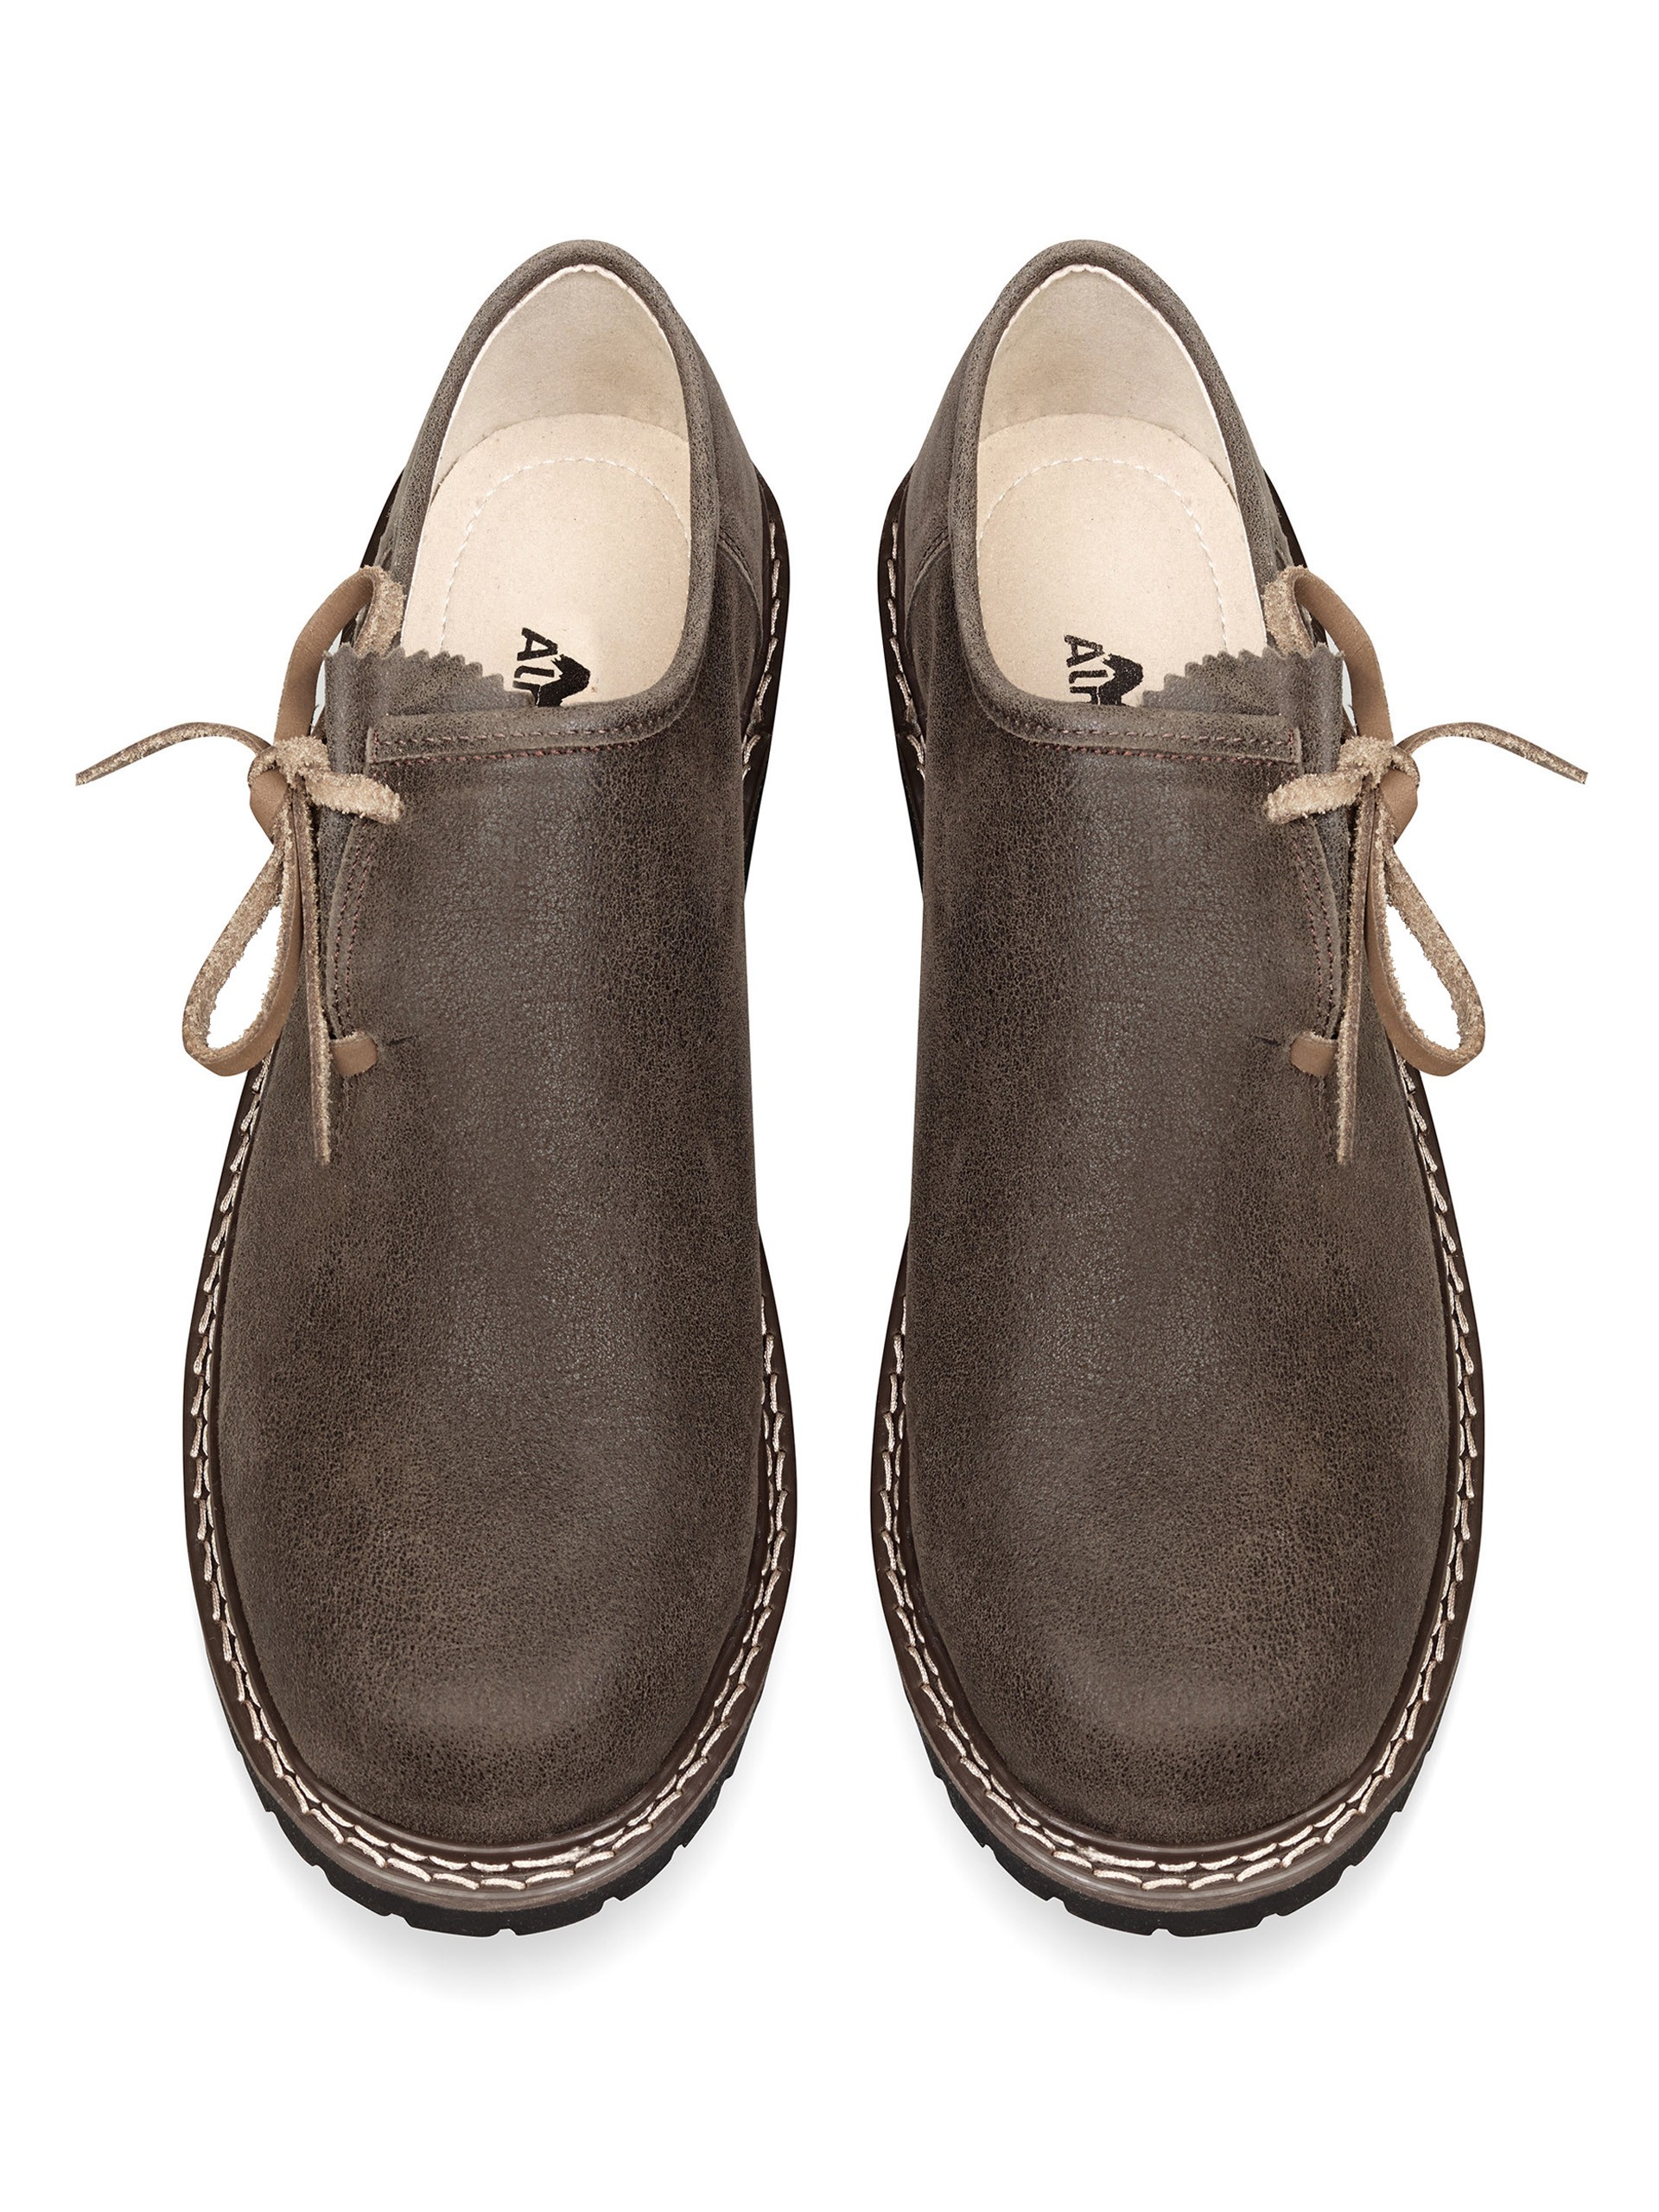 FOGGY Suede Leather Loafers For Men